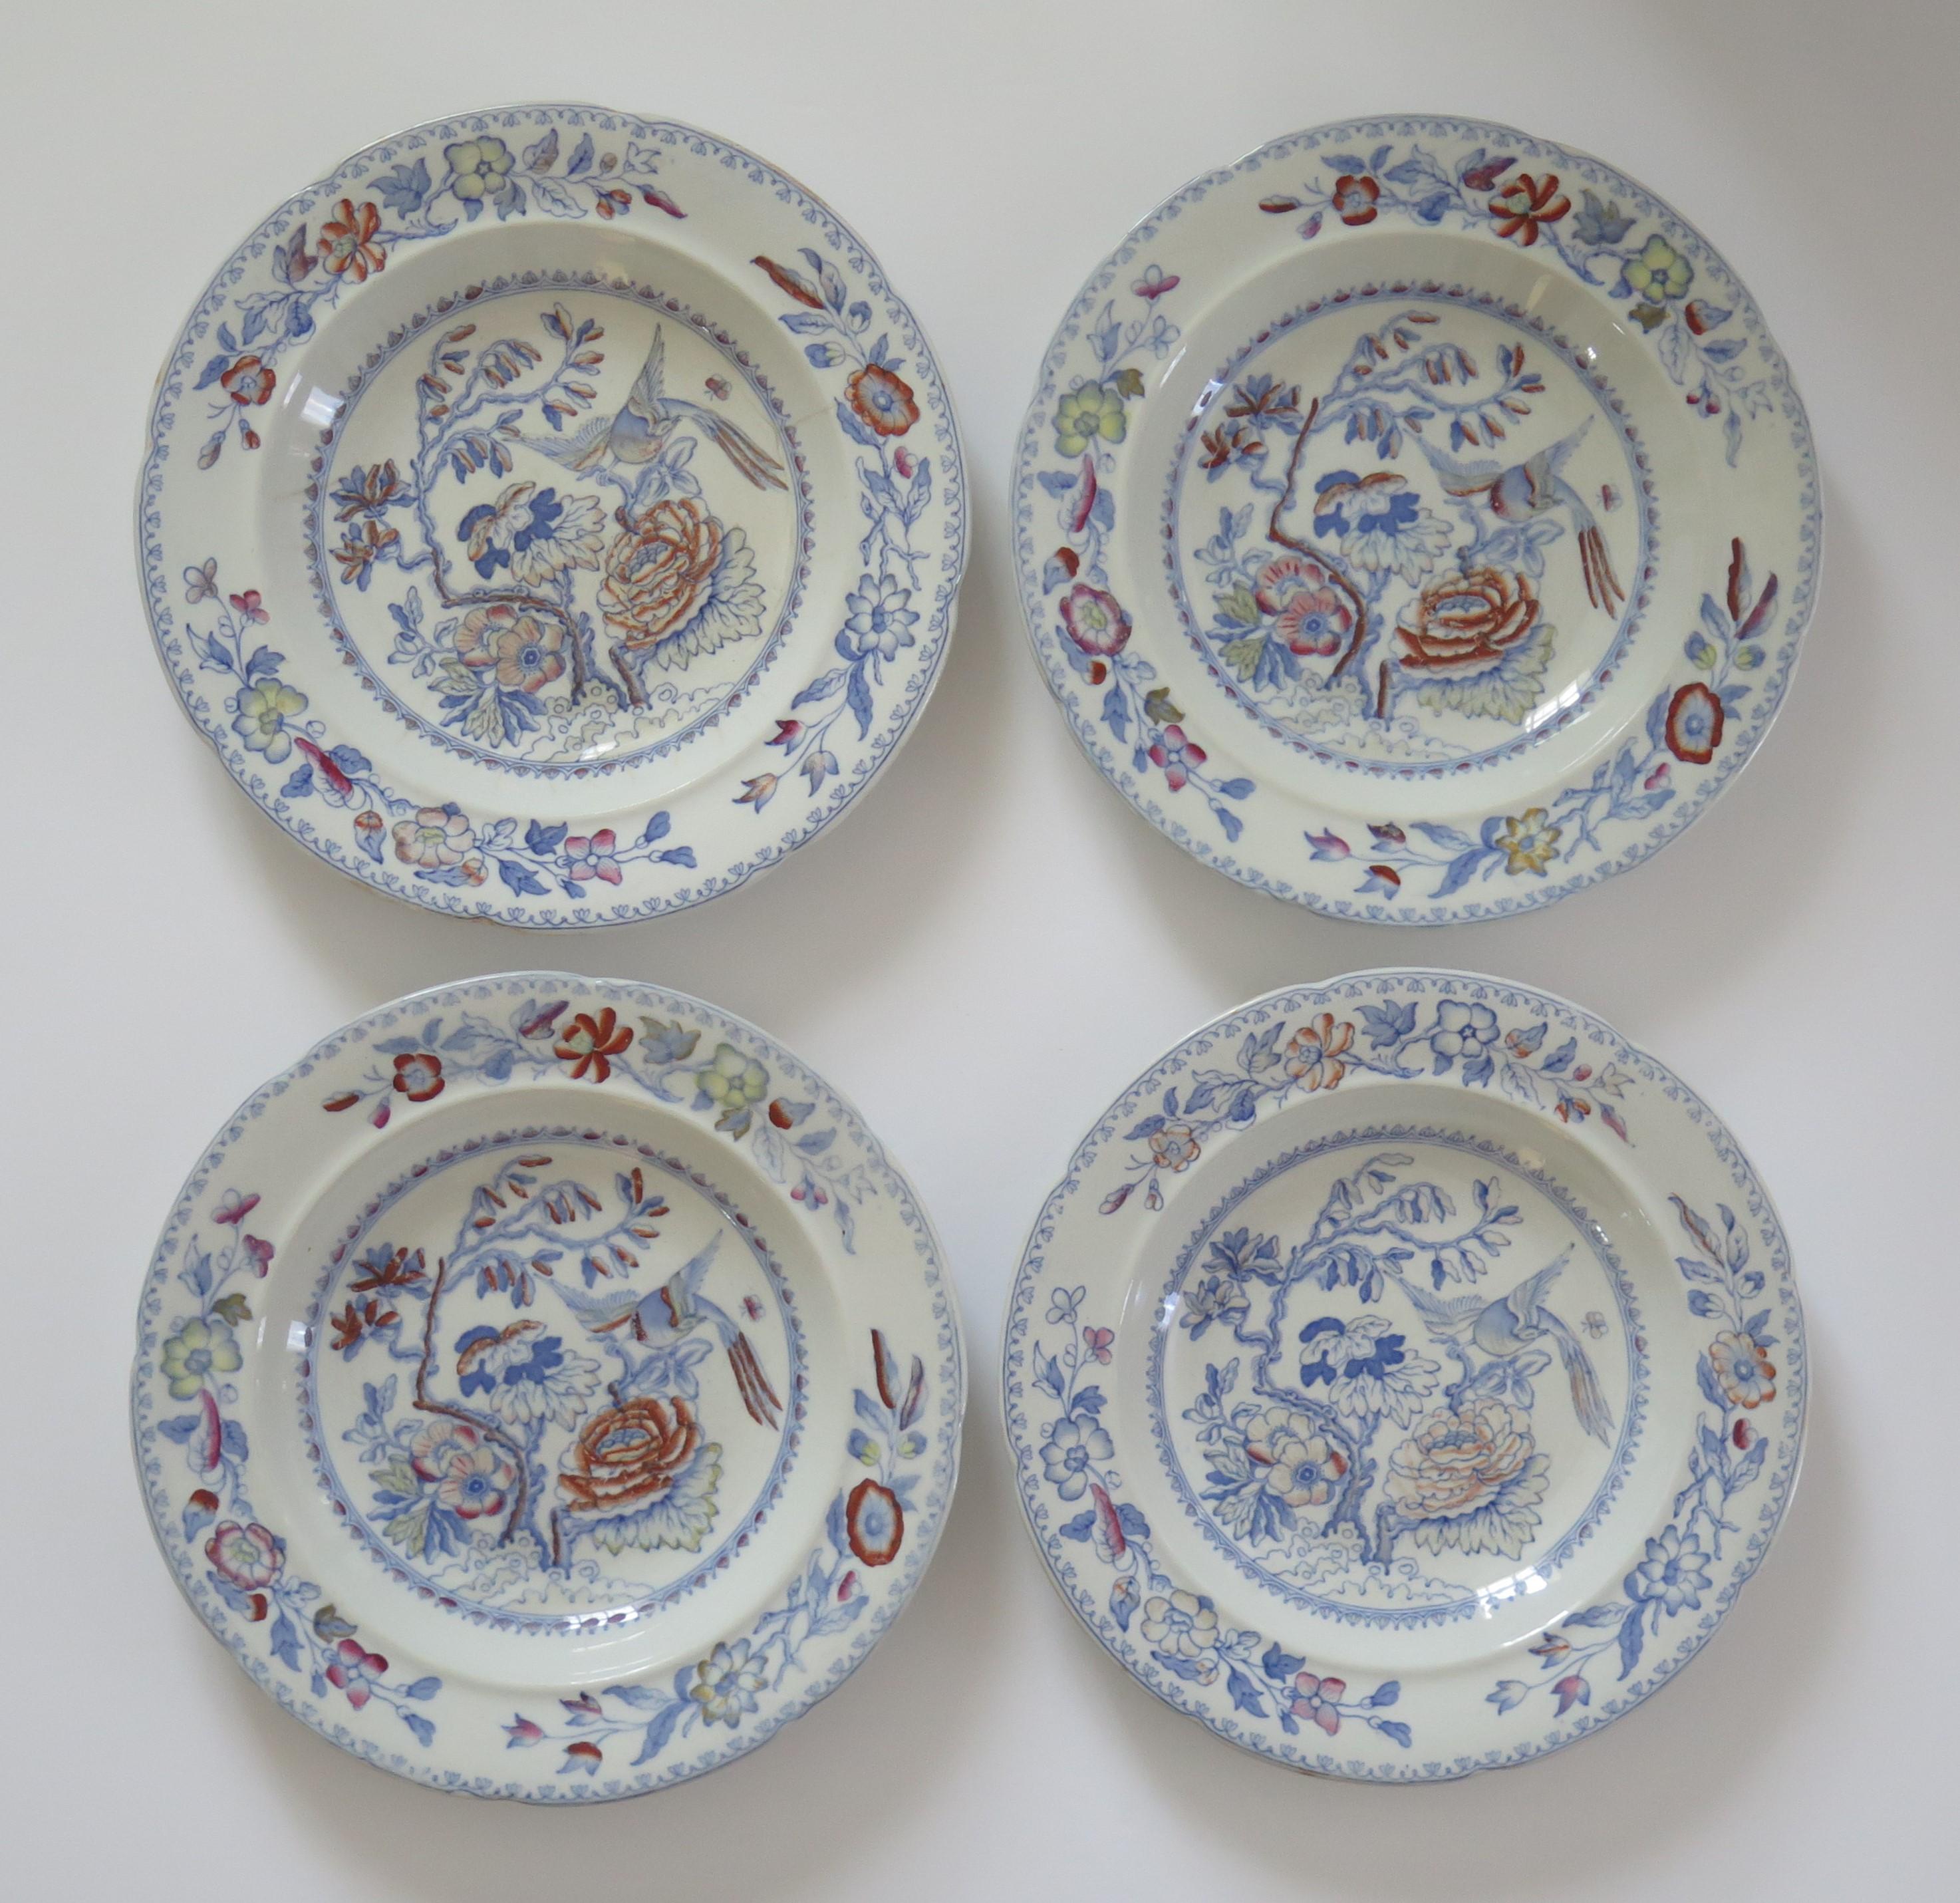 These are a set of FOUR, Ironstone Soup Bowls or Plates in the distinctive flying bird pattern, made by Mason's of Lane Delph, Staffordshire, England, during the mid 19th century, circa 1860.

The Bowls or Plates are well potted with a notched